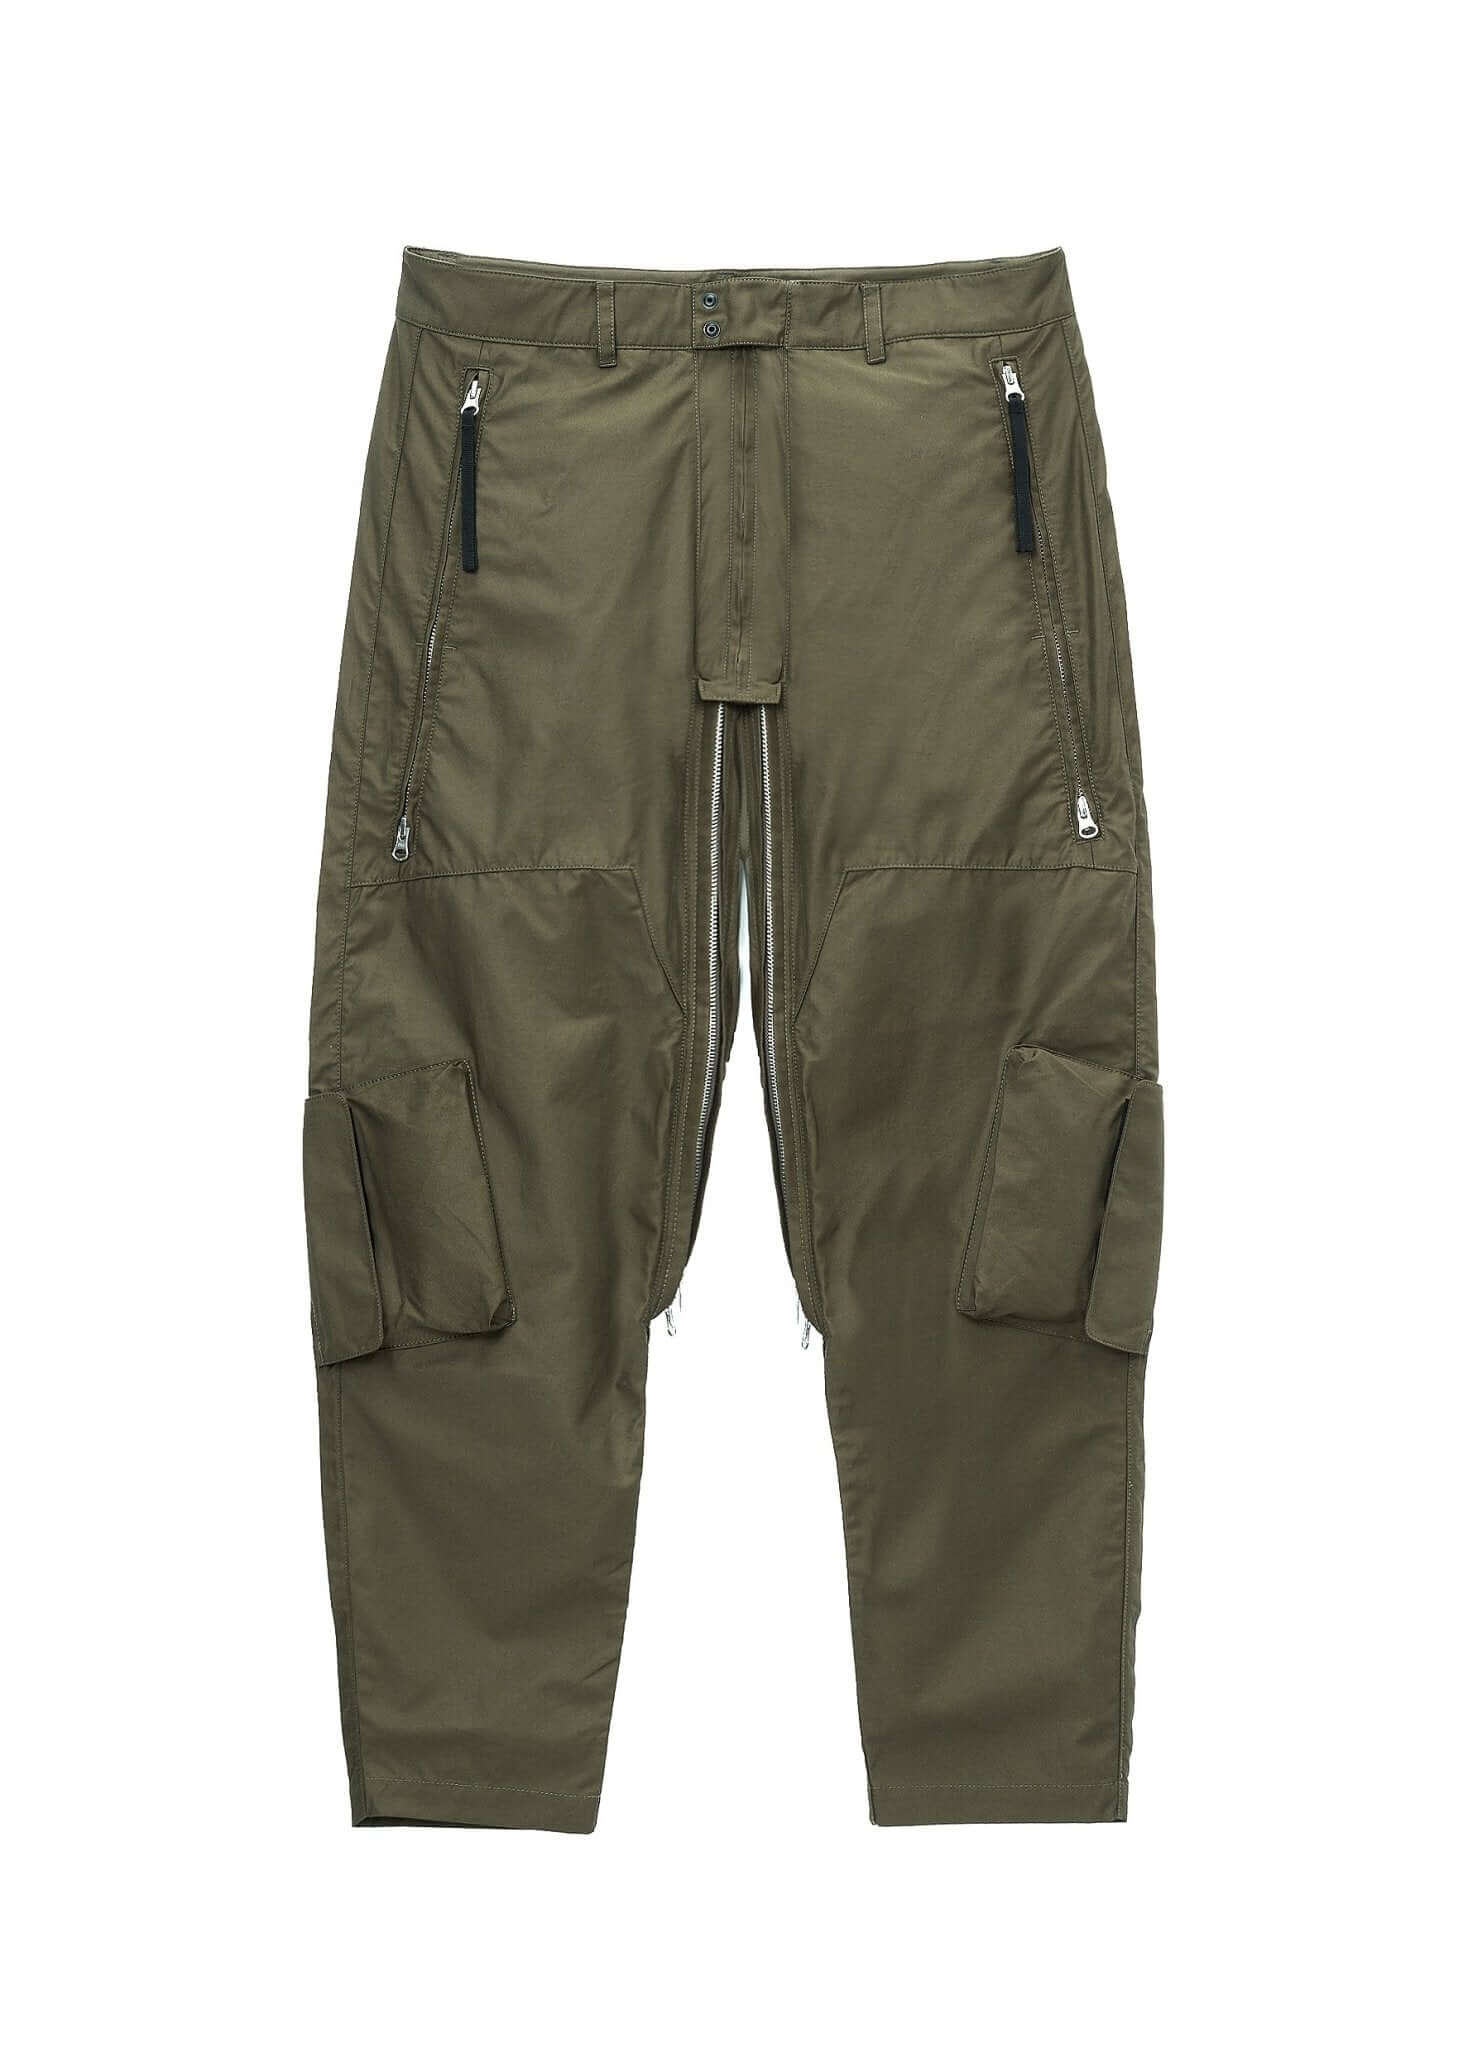 Dwr Articulated Military Pants - NILMANCE